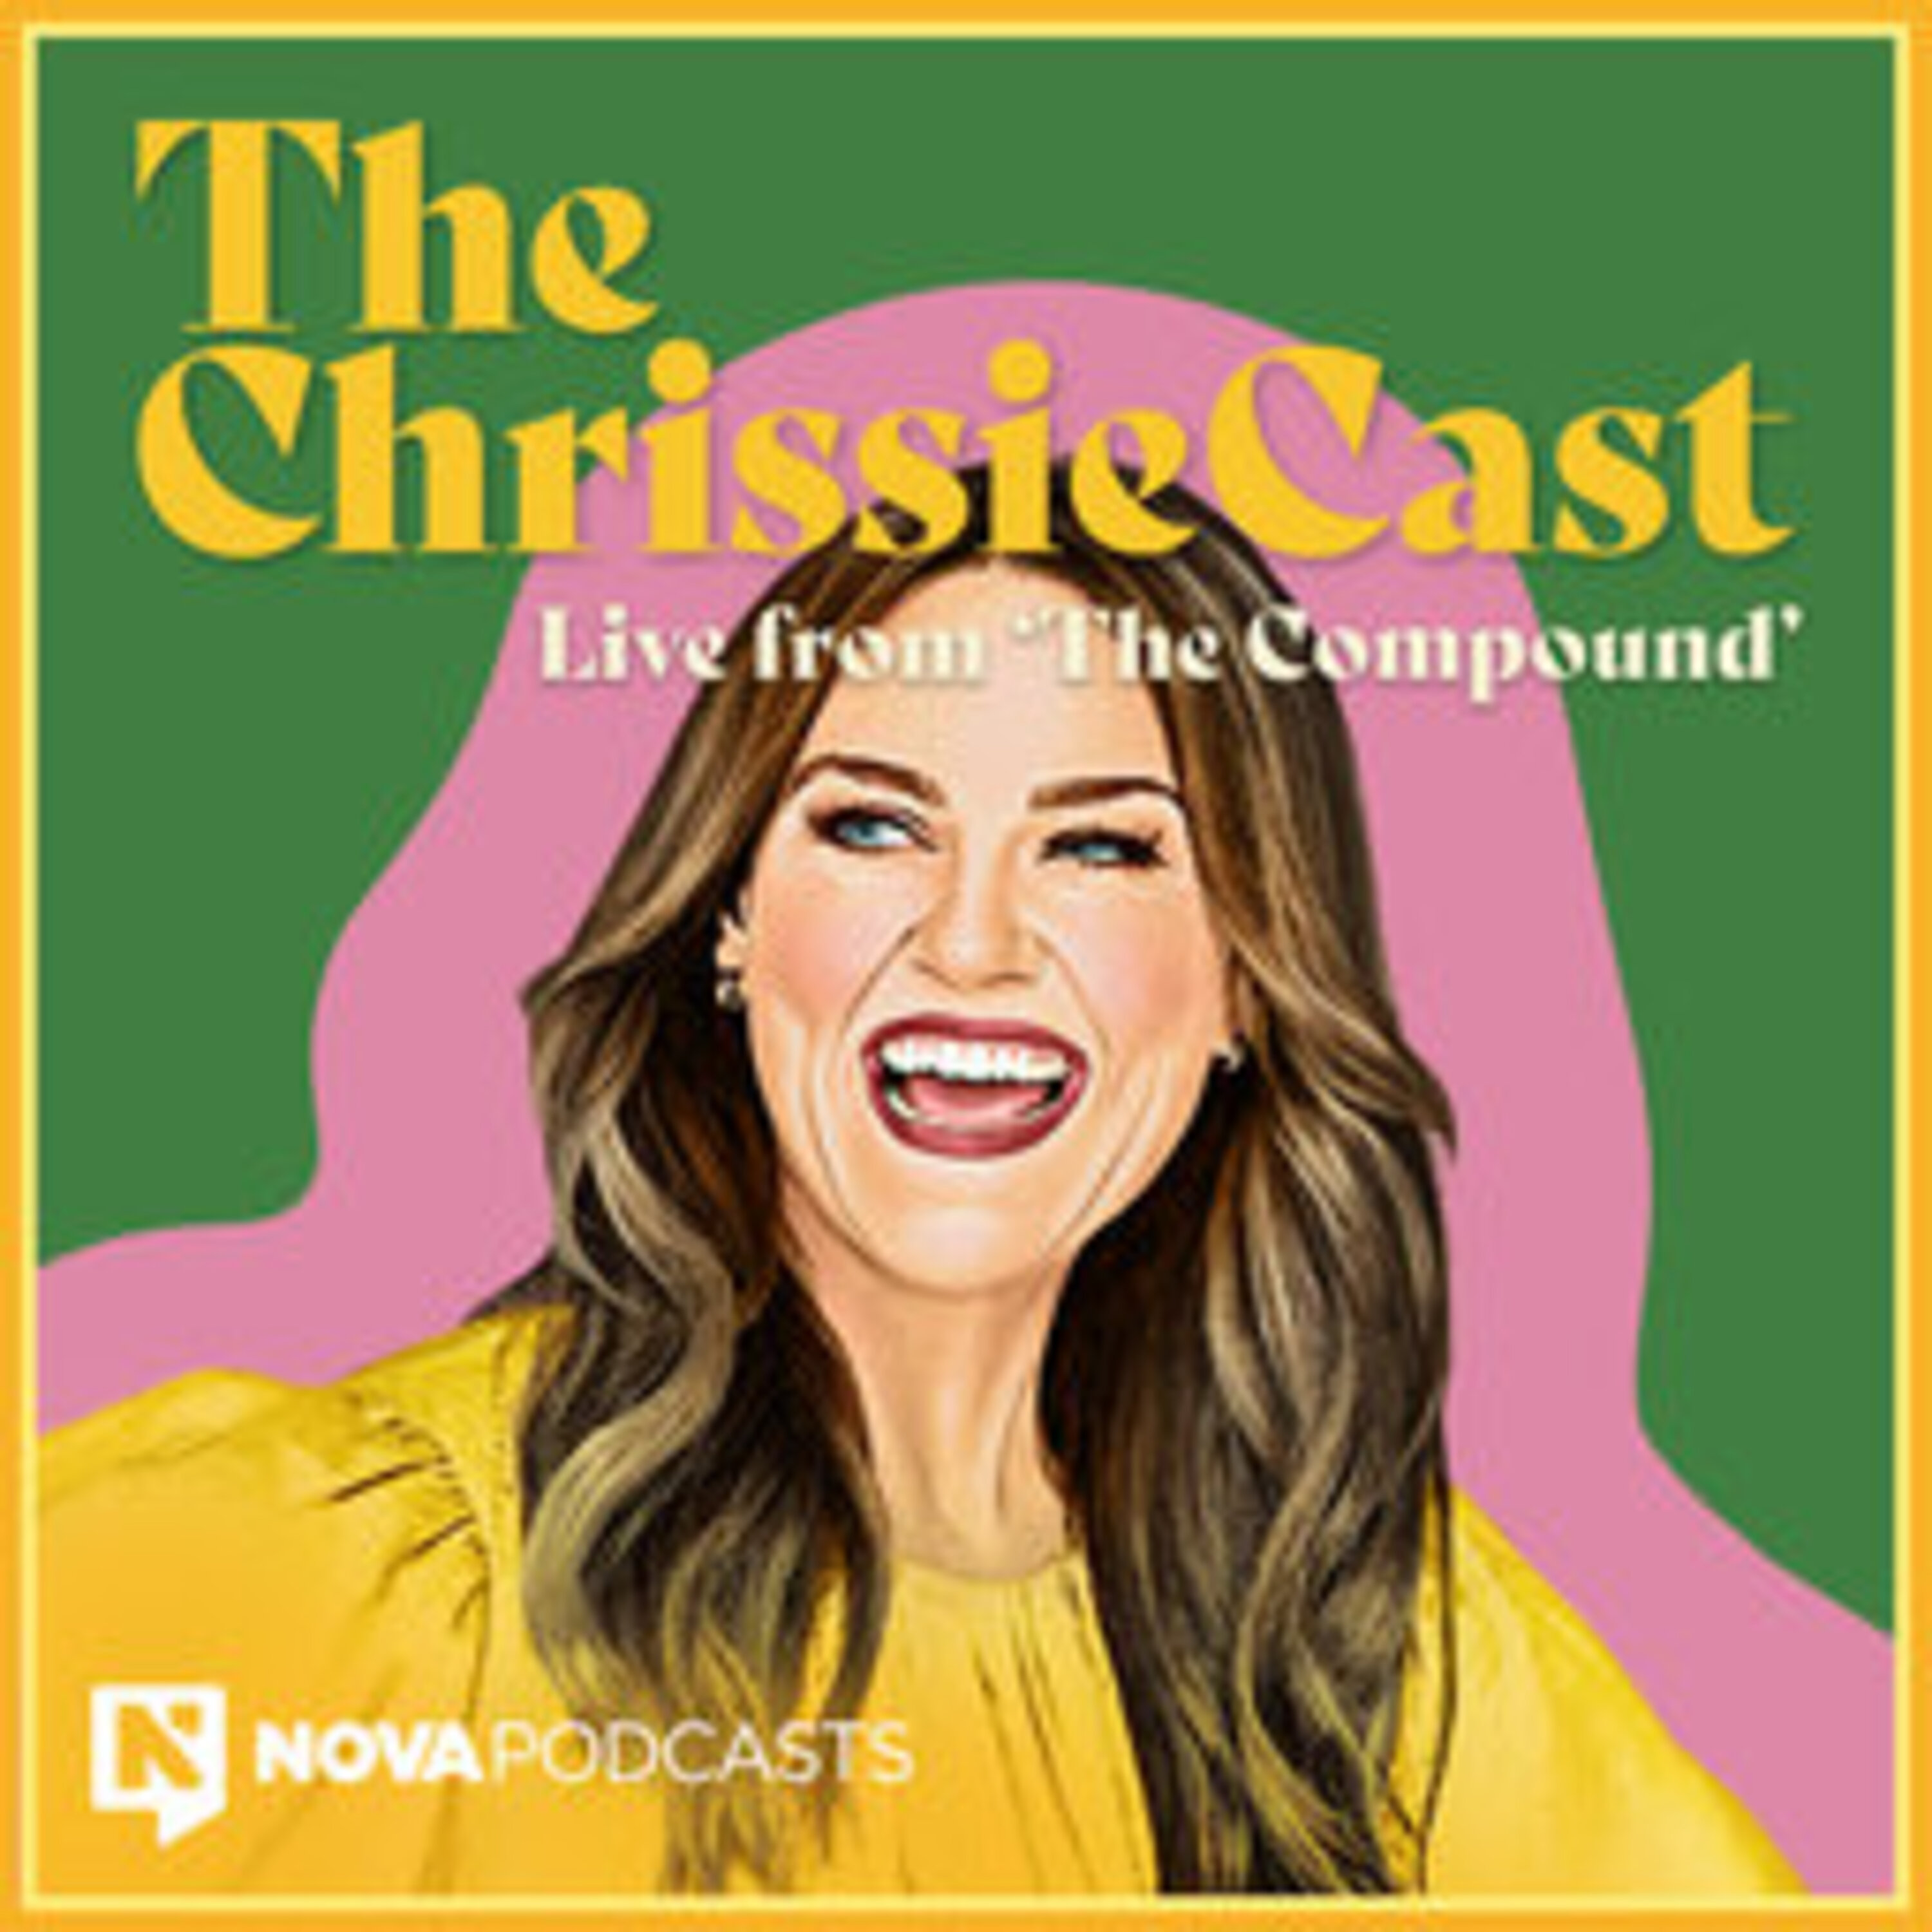 The ChrissieCast: US Stand-Up, Maria Bamford Talks Porcupines, Online Dating And Human Connection, One Barista At A Time